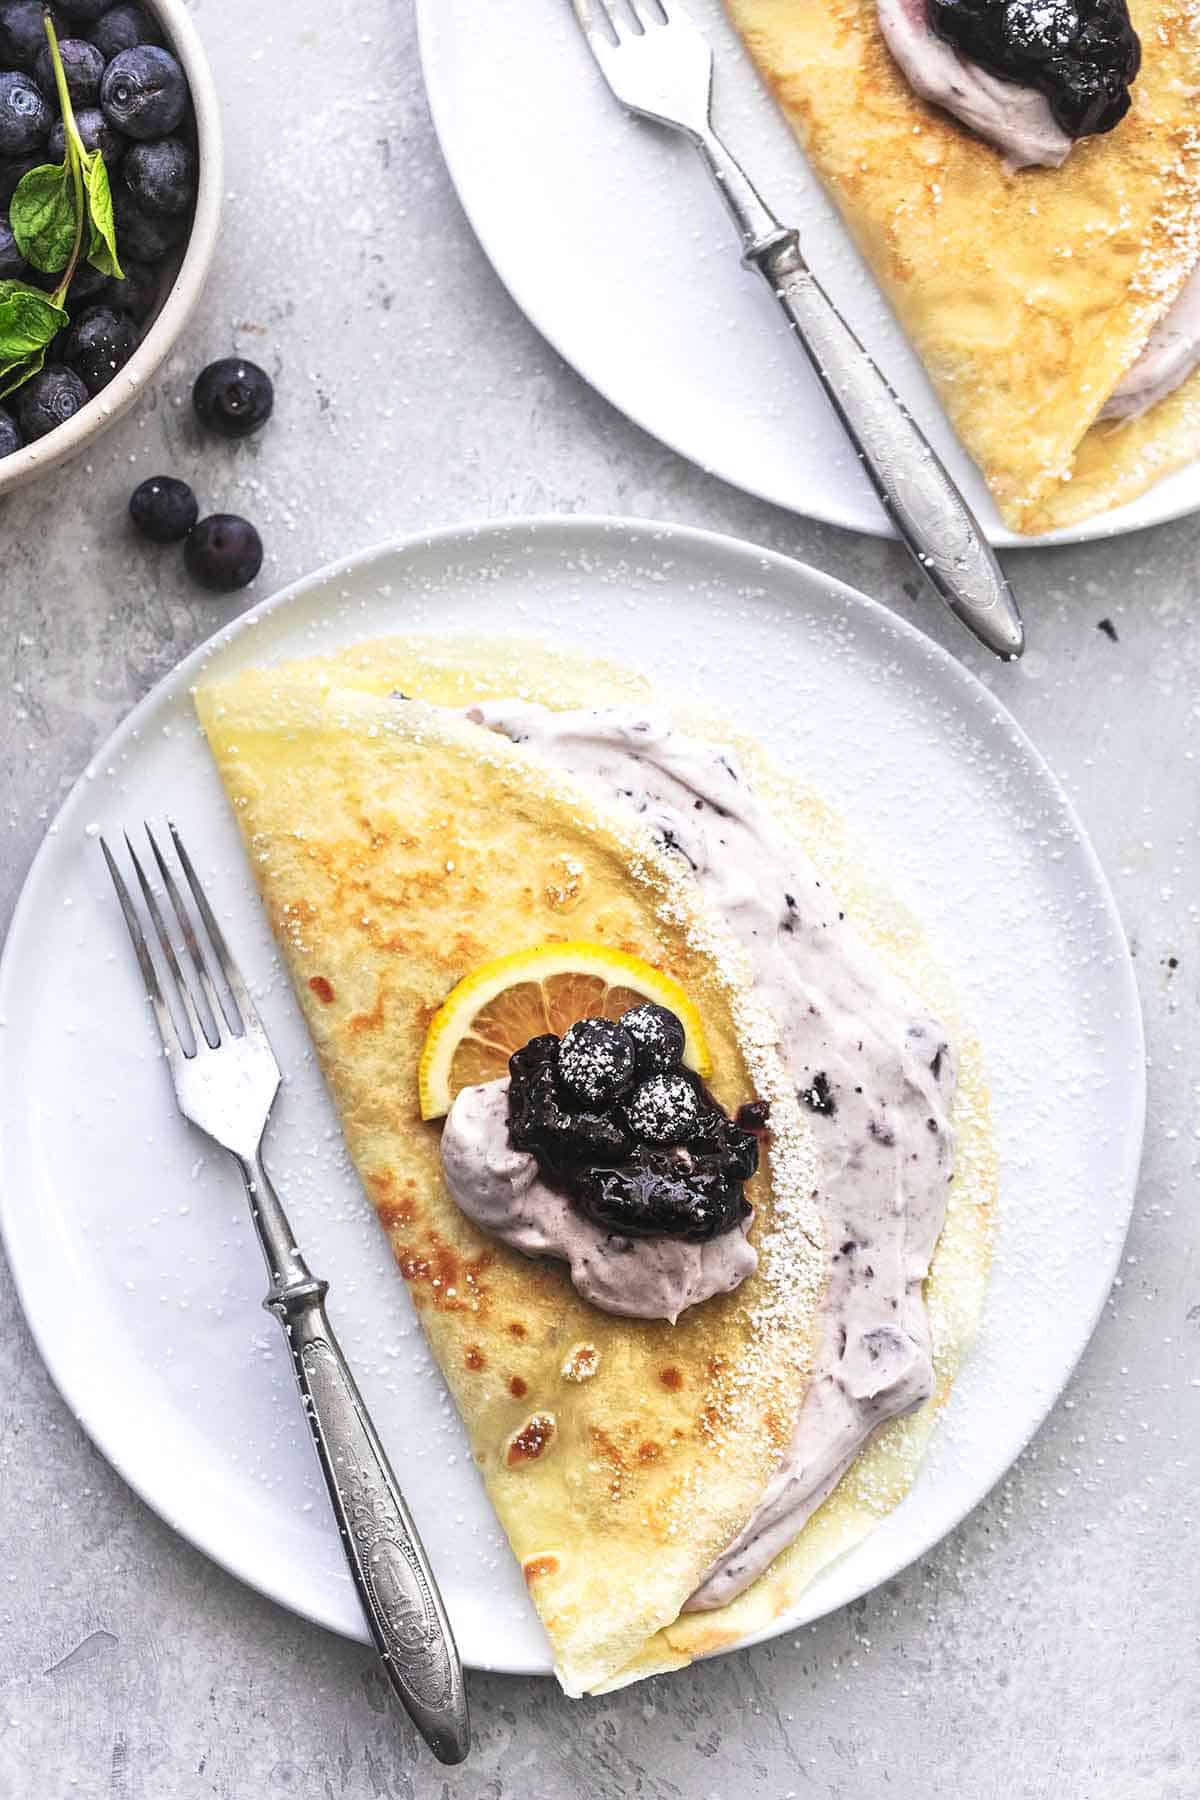 top view of a crepe with blueberry filling with a fork on a plate with a bowl of blueberries and another plate on the side.